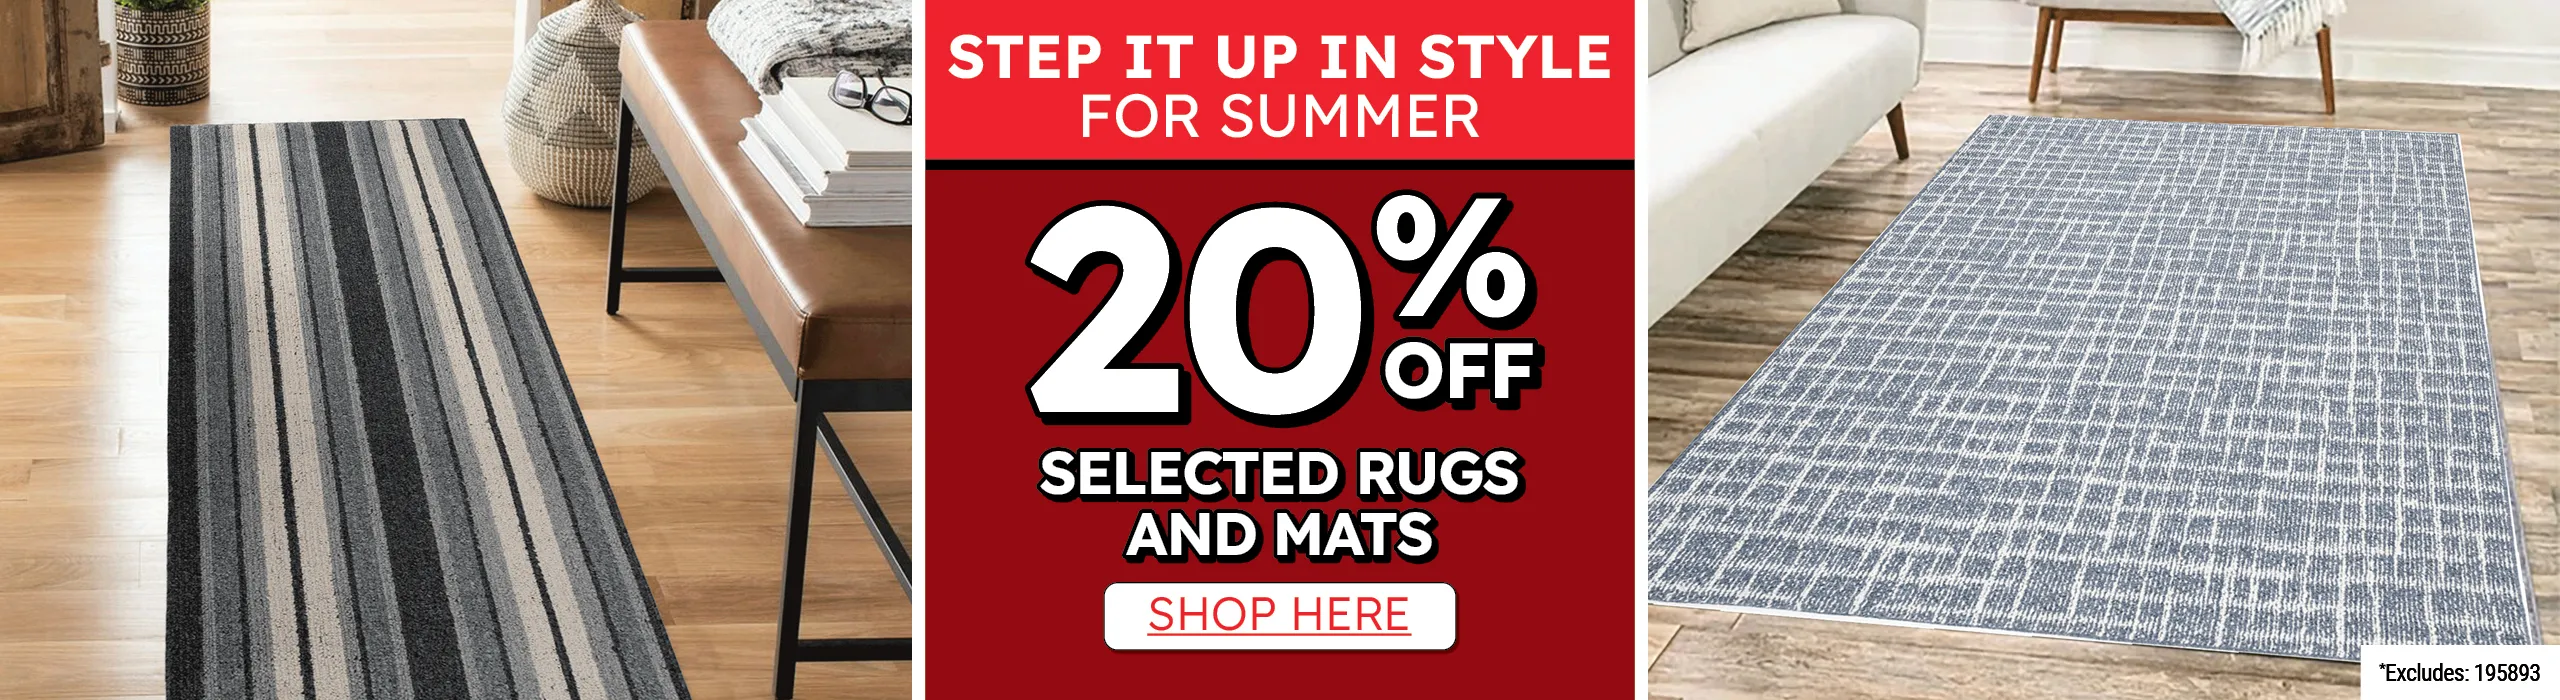 20% off selected rugs